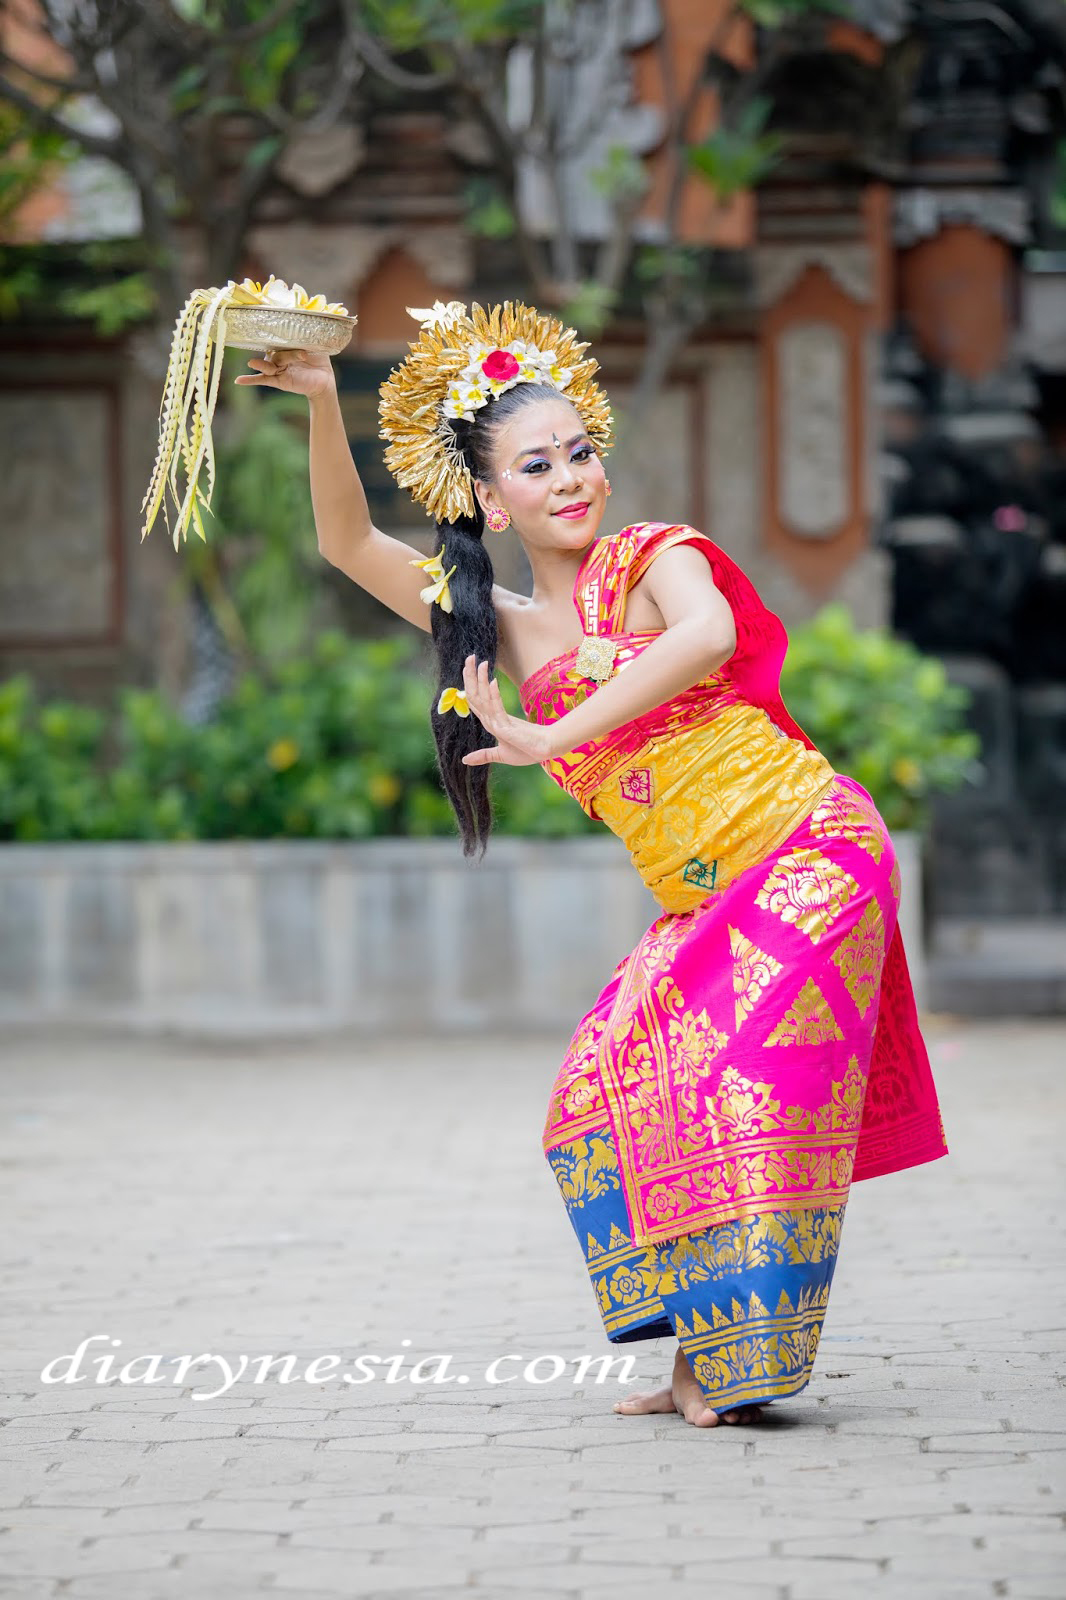 all about traditional balinese dance, how to see traditional balinese dancing, bali tourism, diarynesia